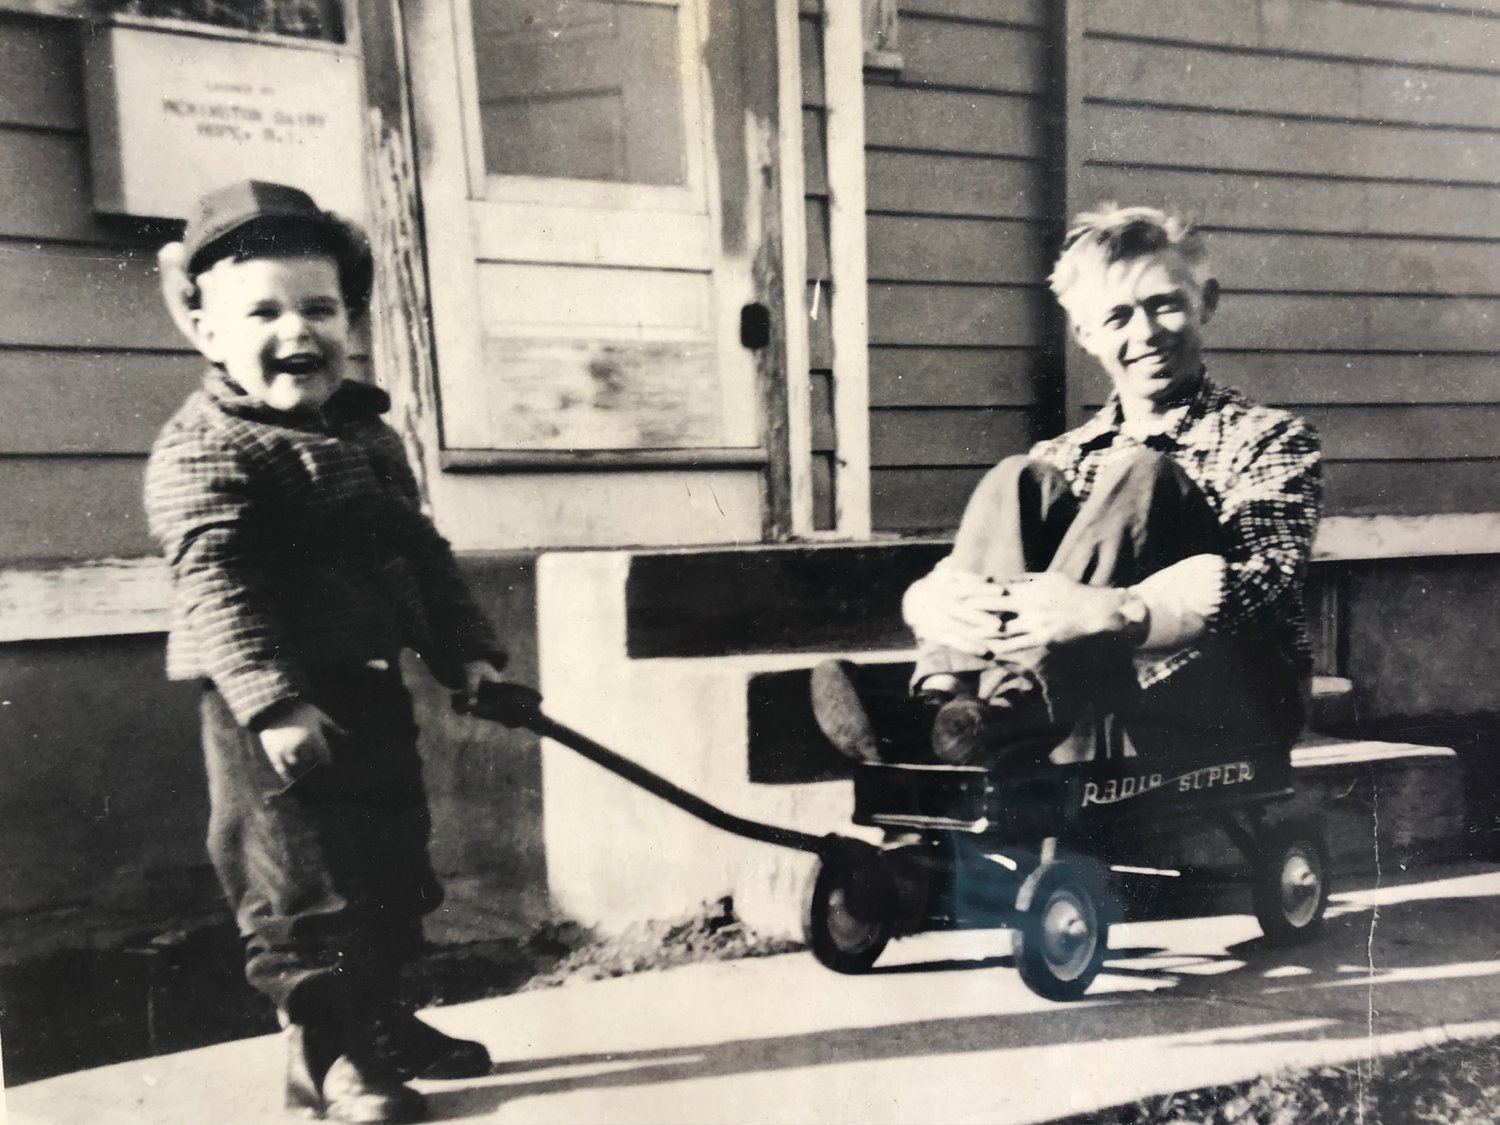 Wheels of all kinds figured prominently in the Rounds family. A young Billy Rounds tows his father Harold around in his own set of wheels in 1954.